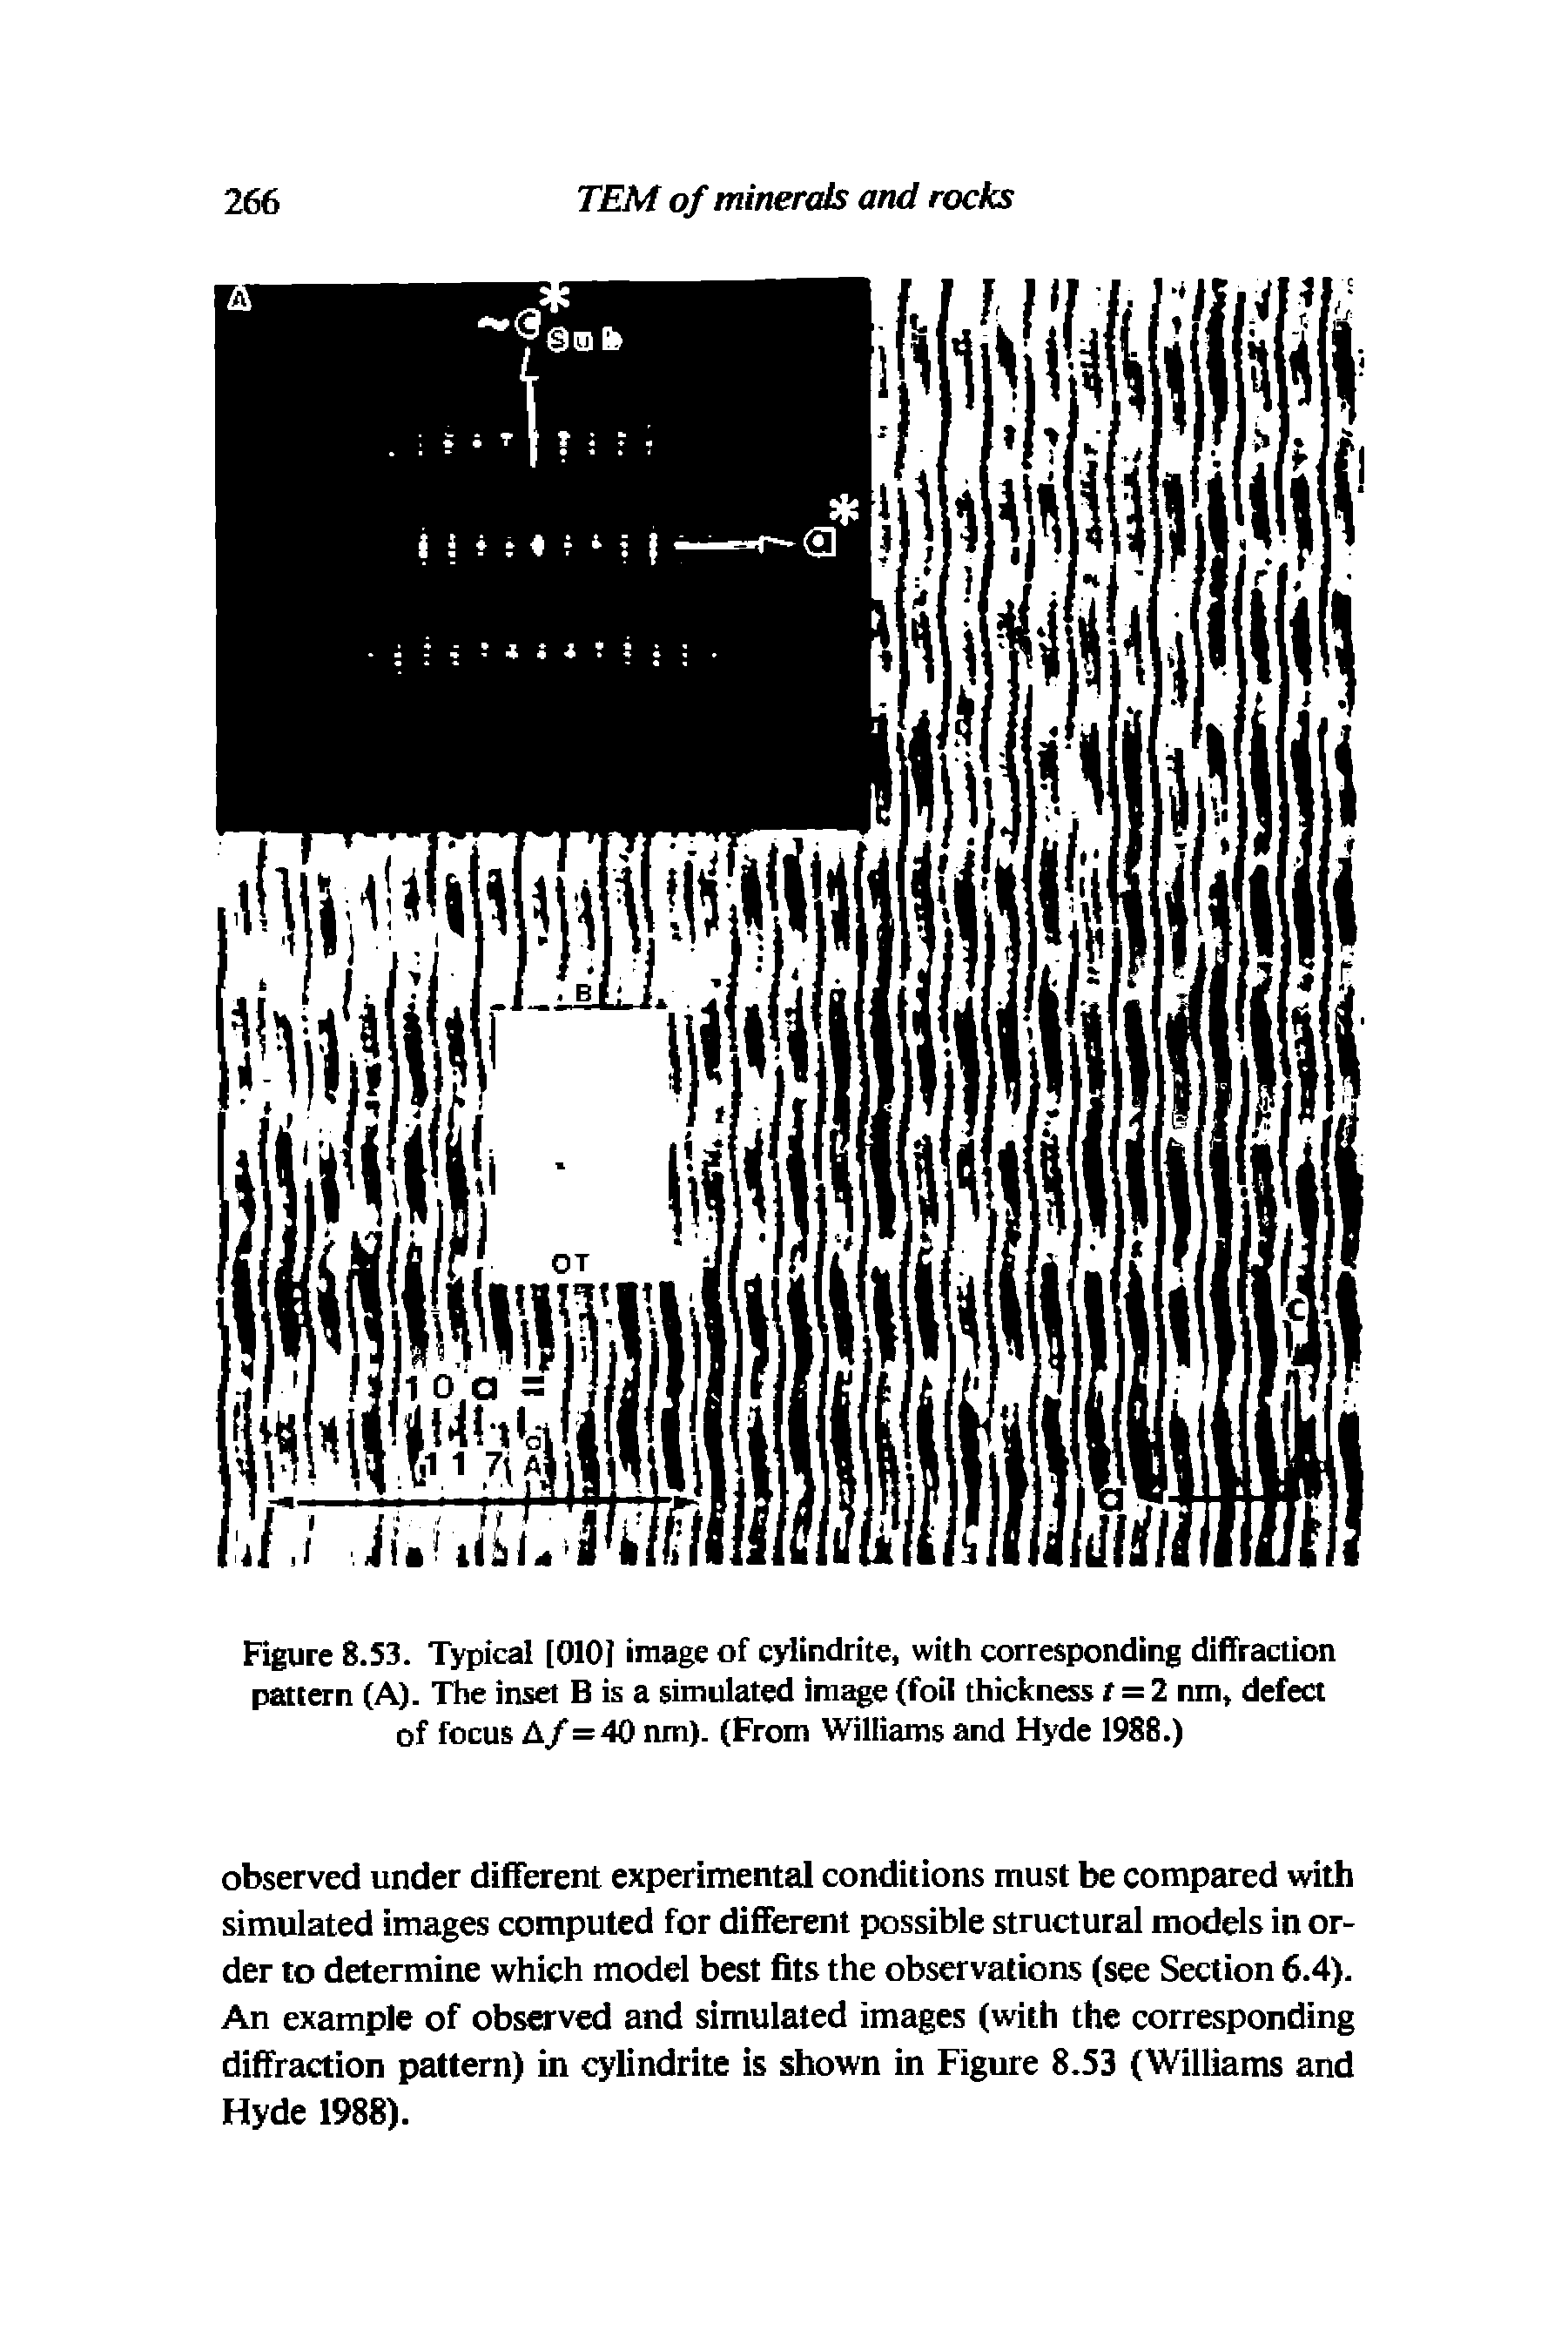 Figure 8.53. Typical [0101 image of cylindrite, with corresponding diffraction pattern (A). The inset B is a simulated image (foil thickness r = 2 nm, defect of focus A/=40 nm). (From Williams and Hyde 1988.)...